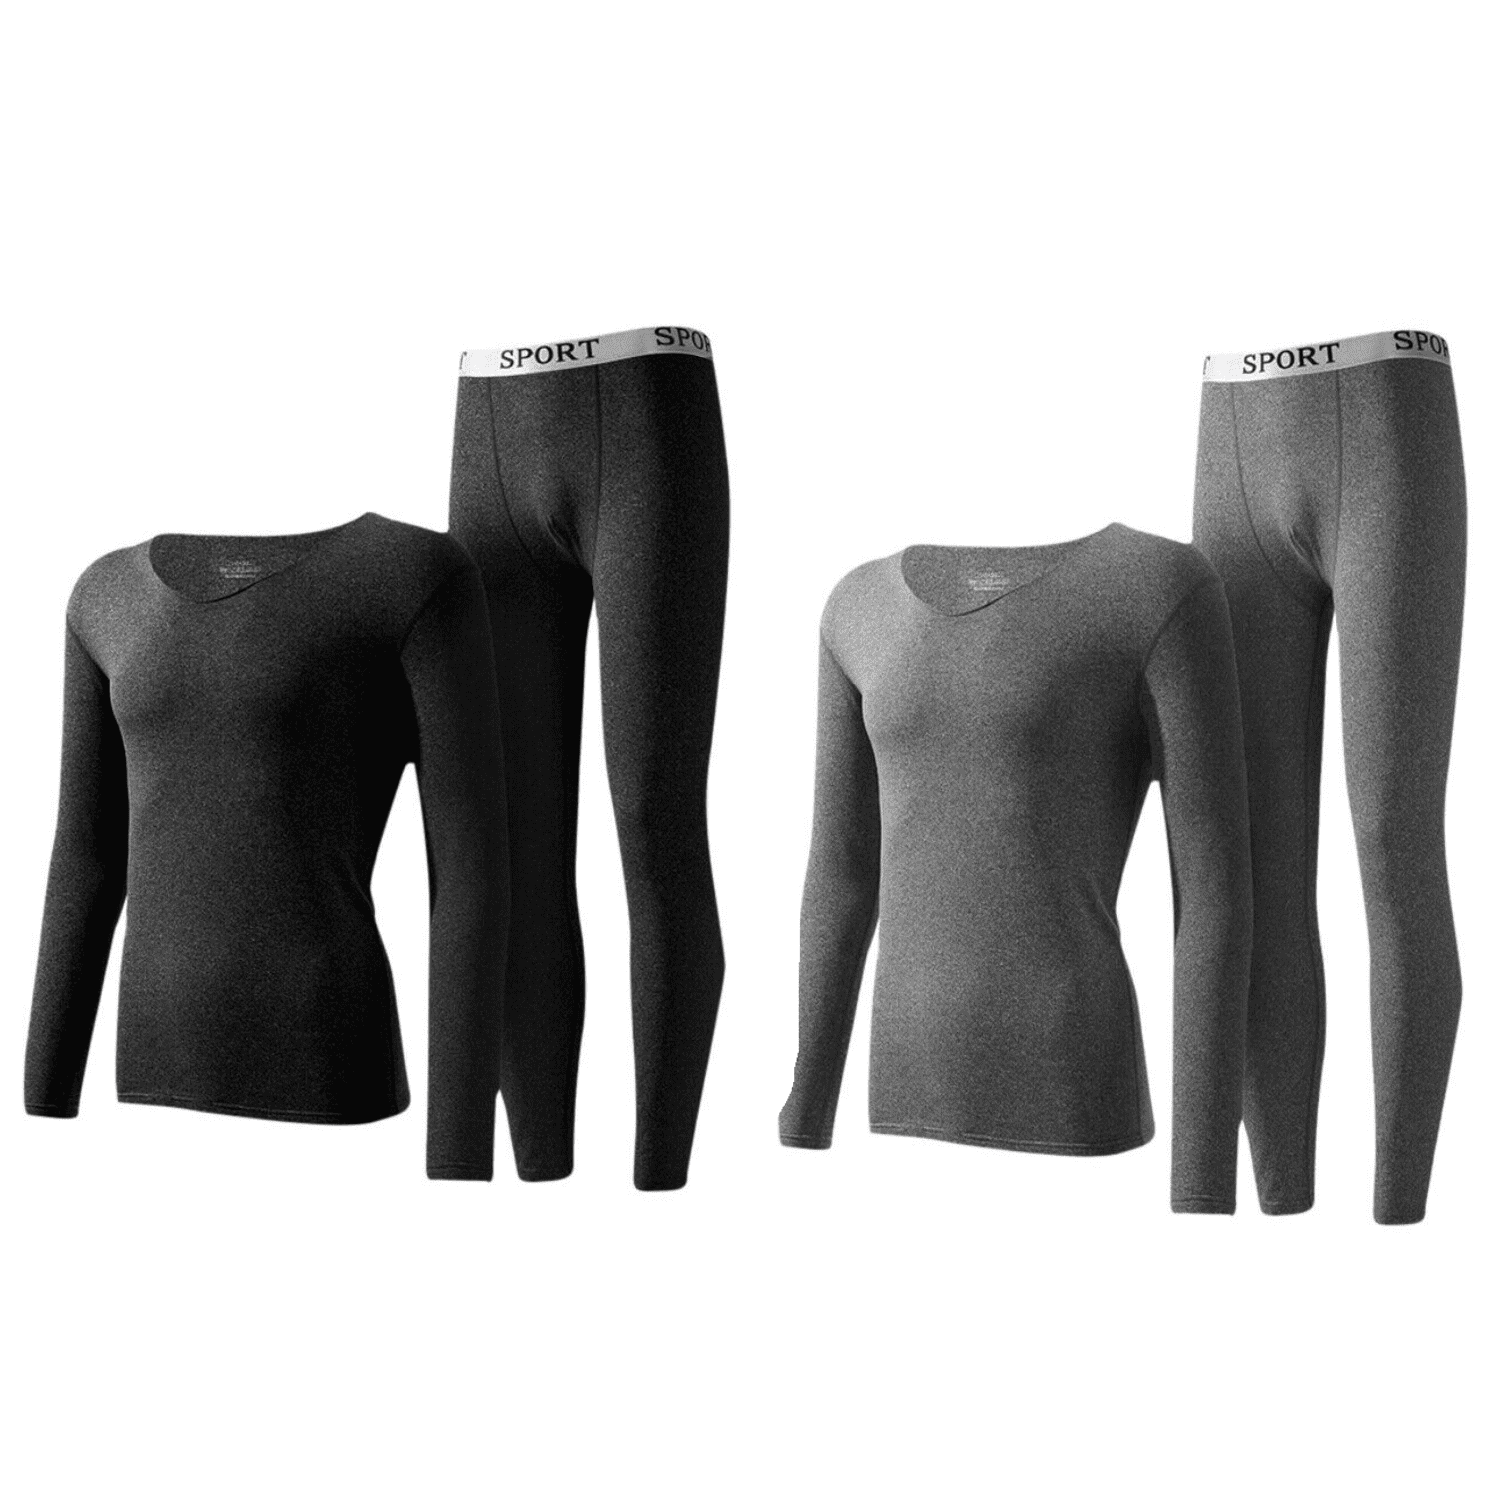 Mens Thermal Underwear Set, Soft and Warm Underwear for Men Thermal ...